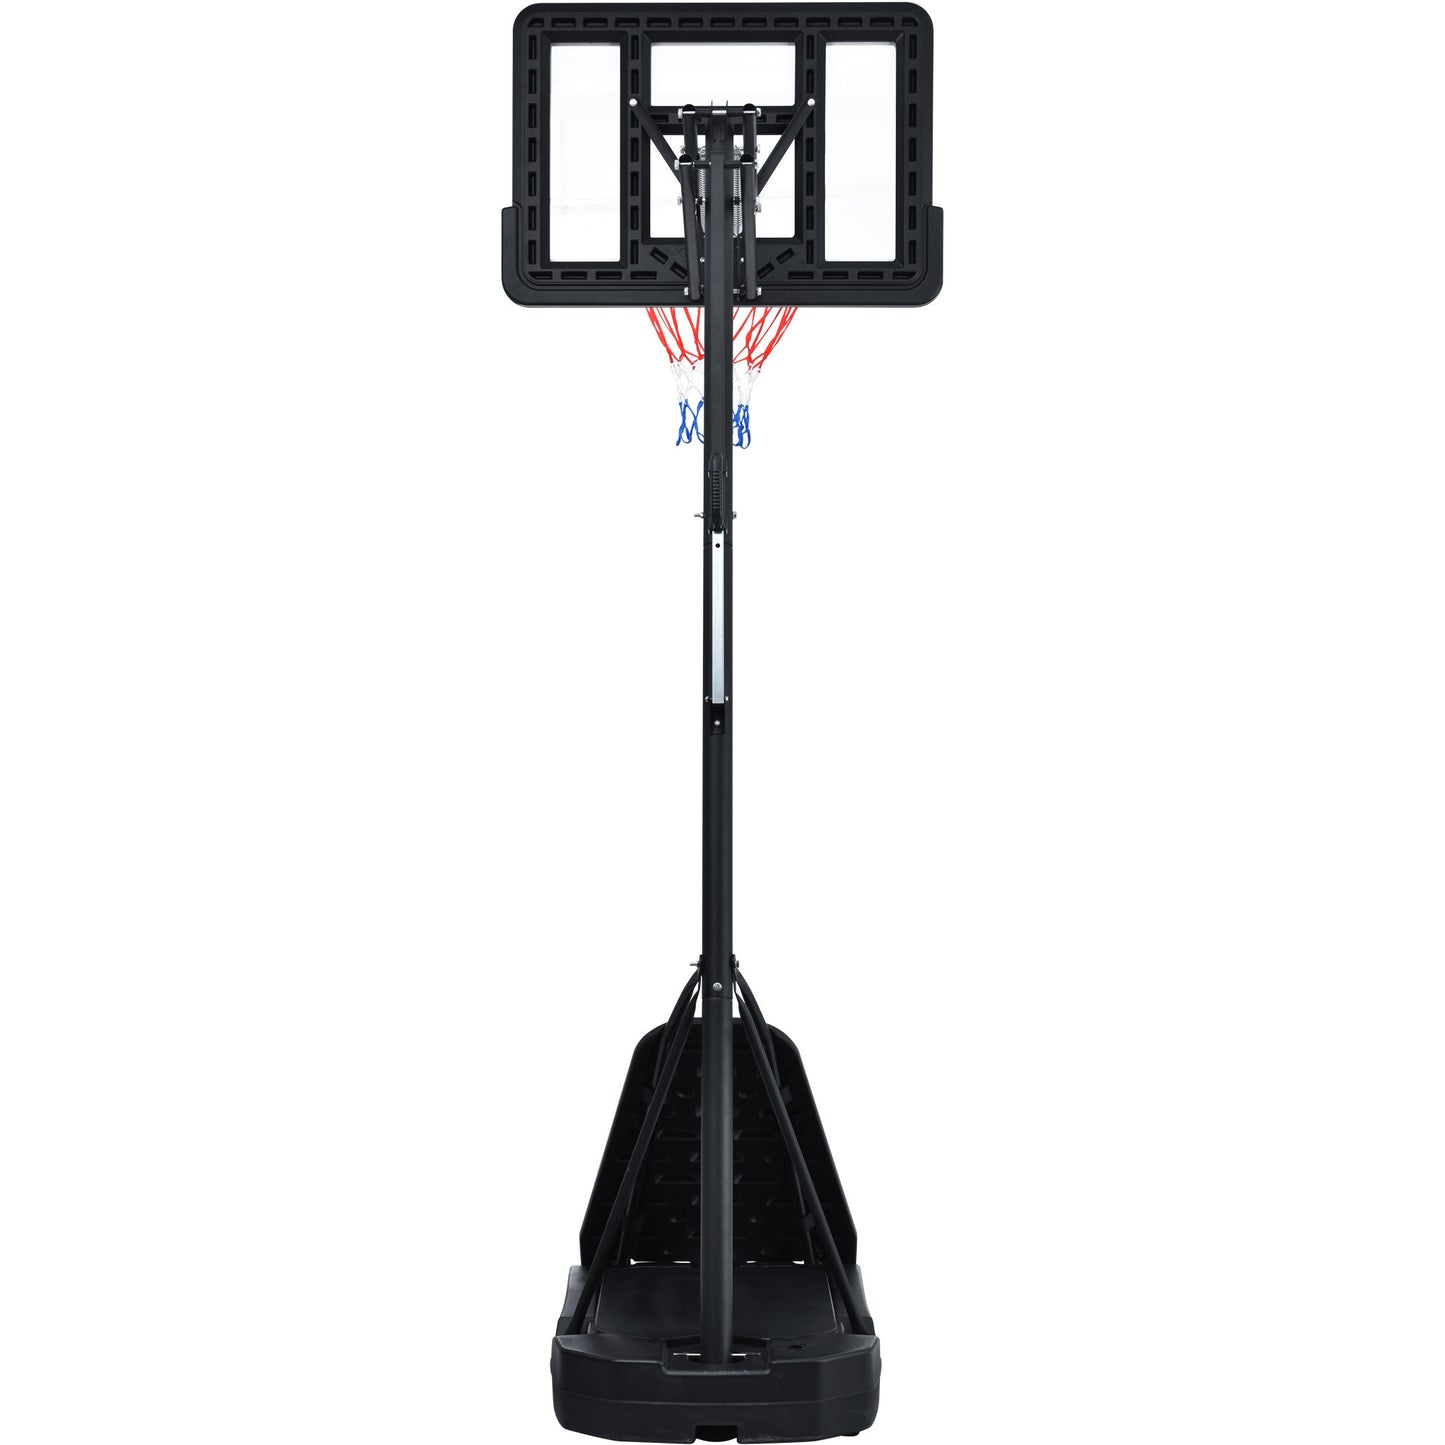 Portable Basketball Hoop Basketball System 8-10ft Height Adjustment for Youth Adults LED Basketball Hoop Lights, Colorful lights, Waterproof，Super Bright to Play at Night Outdoors,Good Gift for Kids